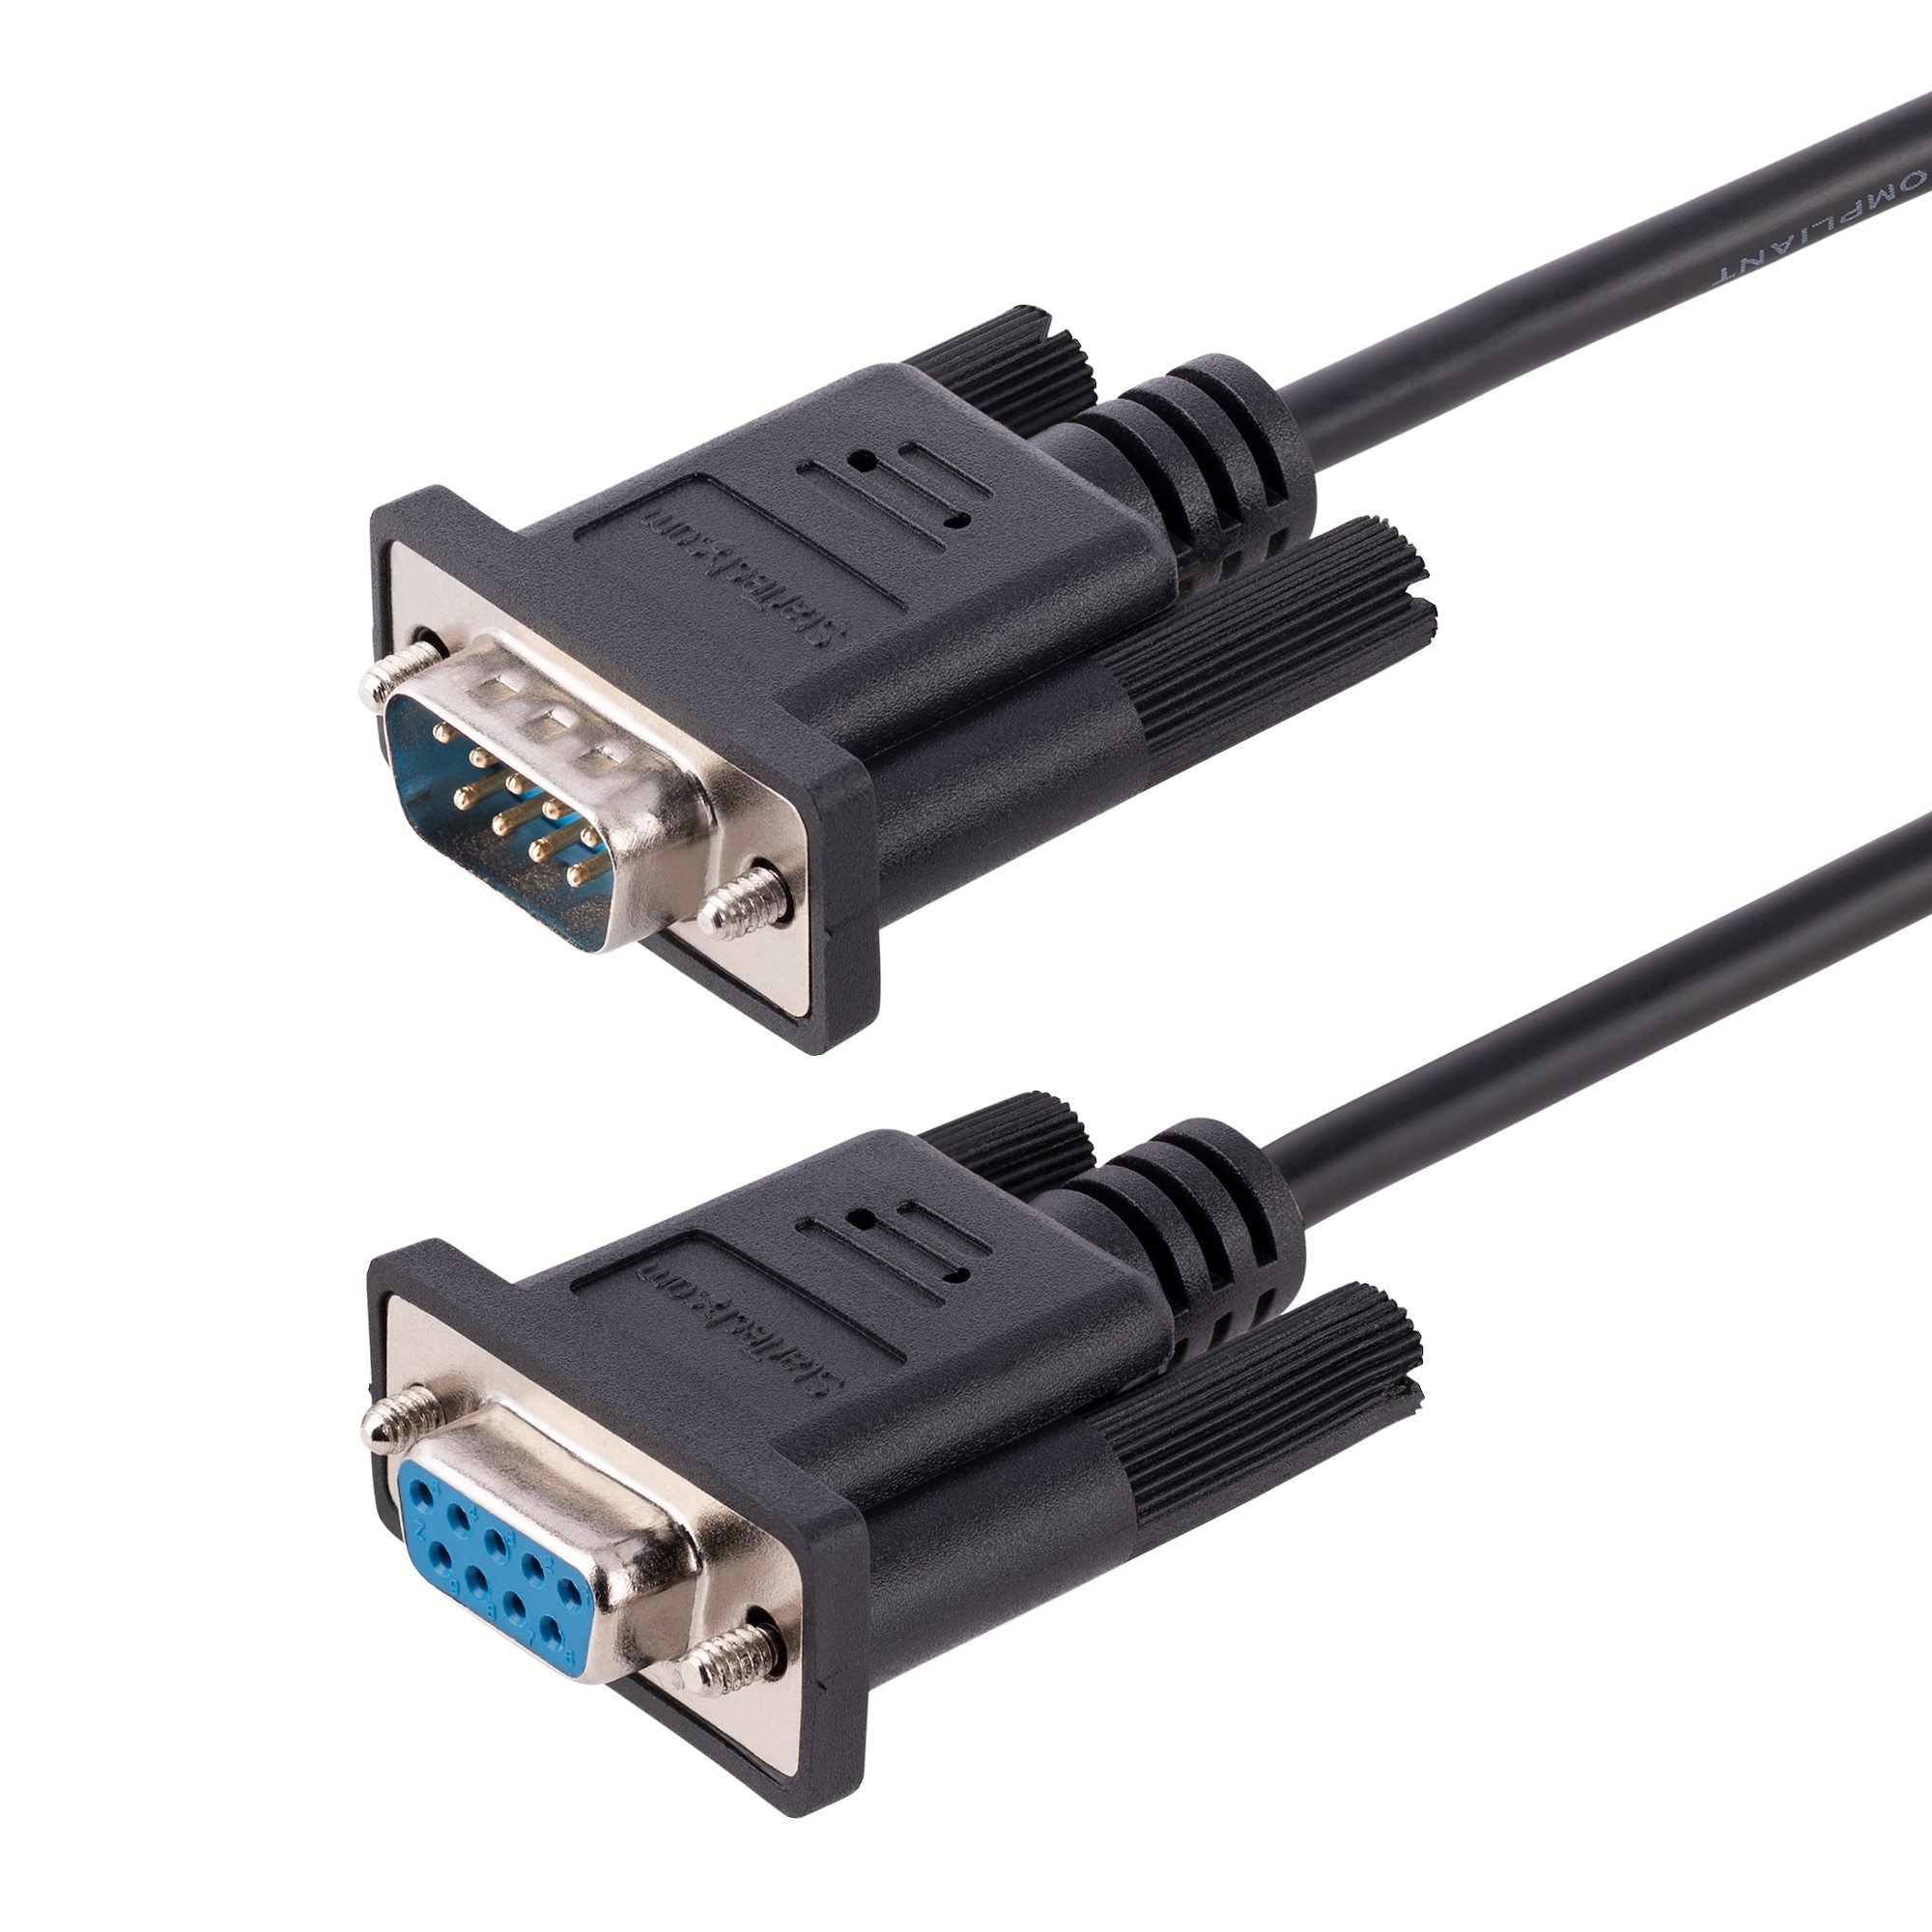 https://media.startech.com/cms/products/gallery_large/9fmnm-3m-rs232-cable.main.jpg